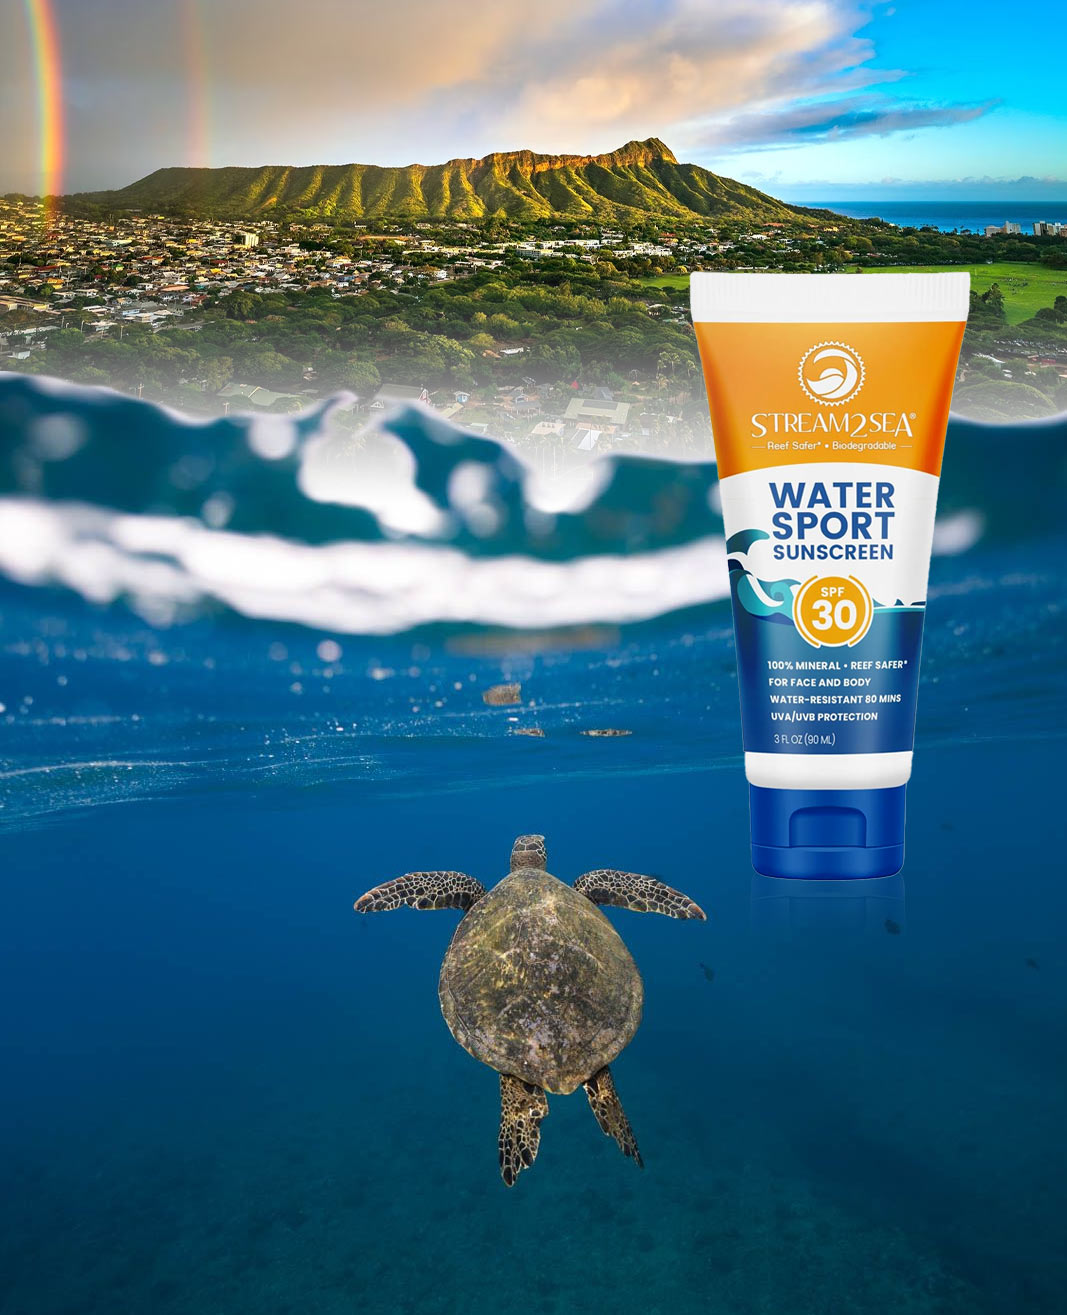 What sunscreen or sunblock is safe for Sea Turtles?